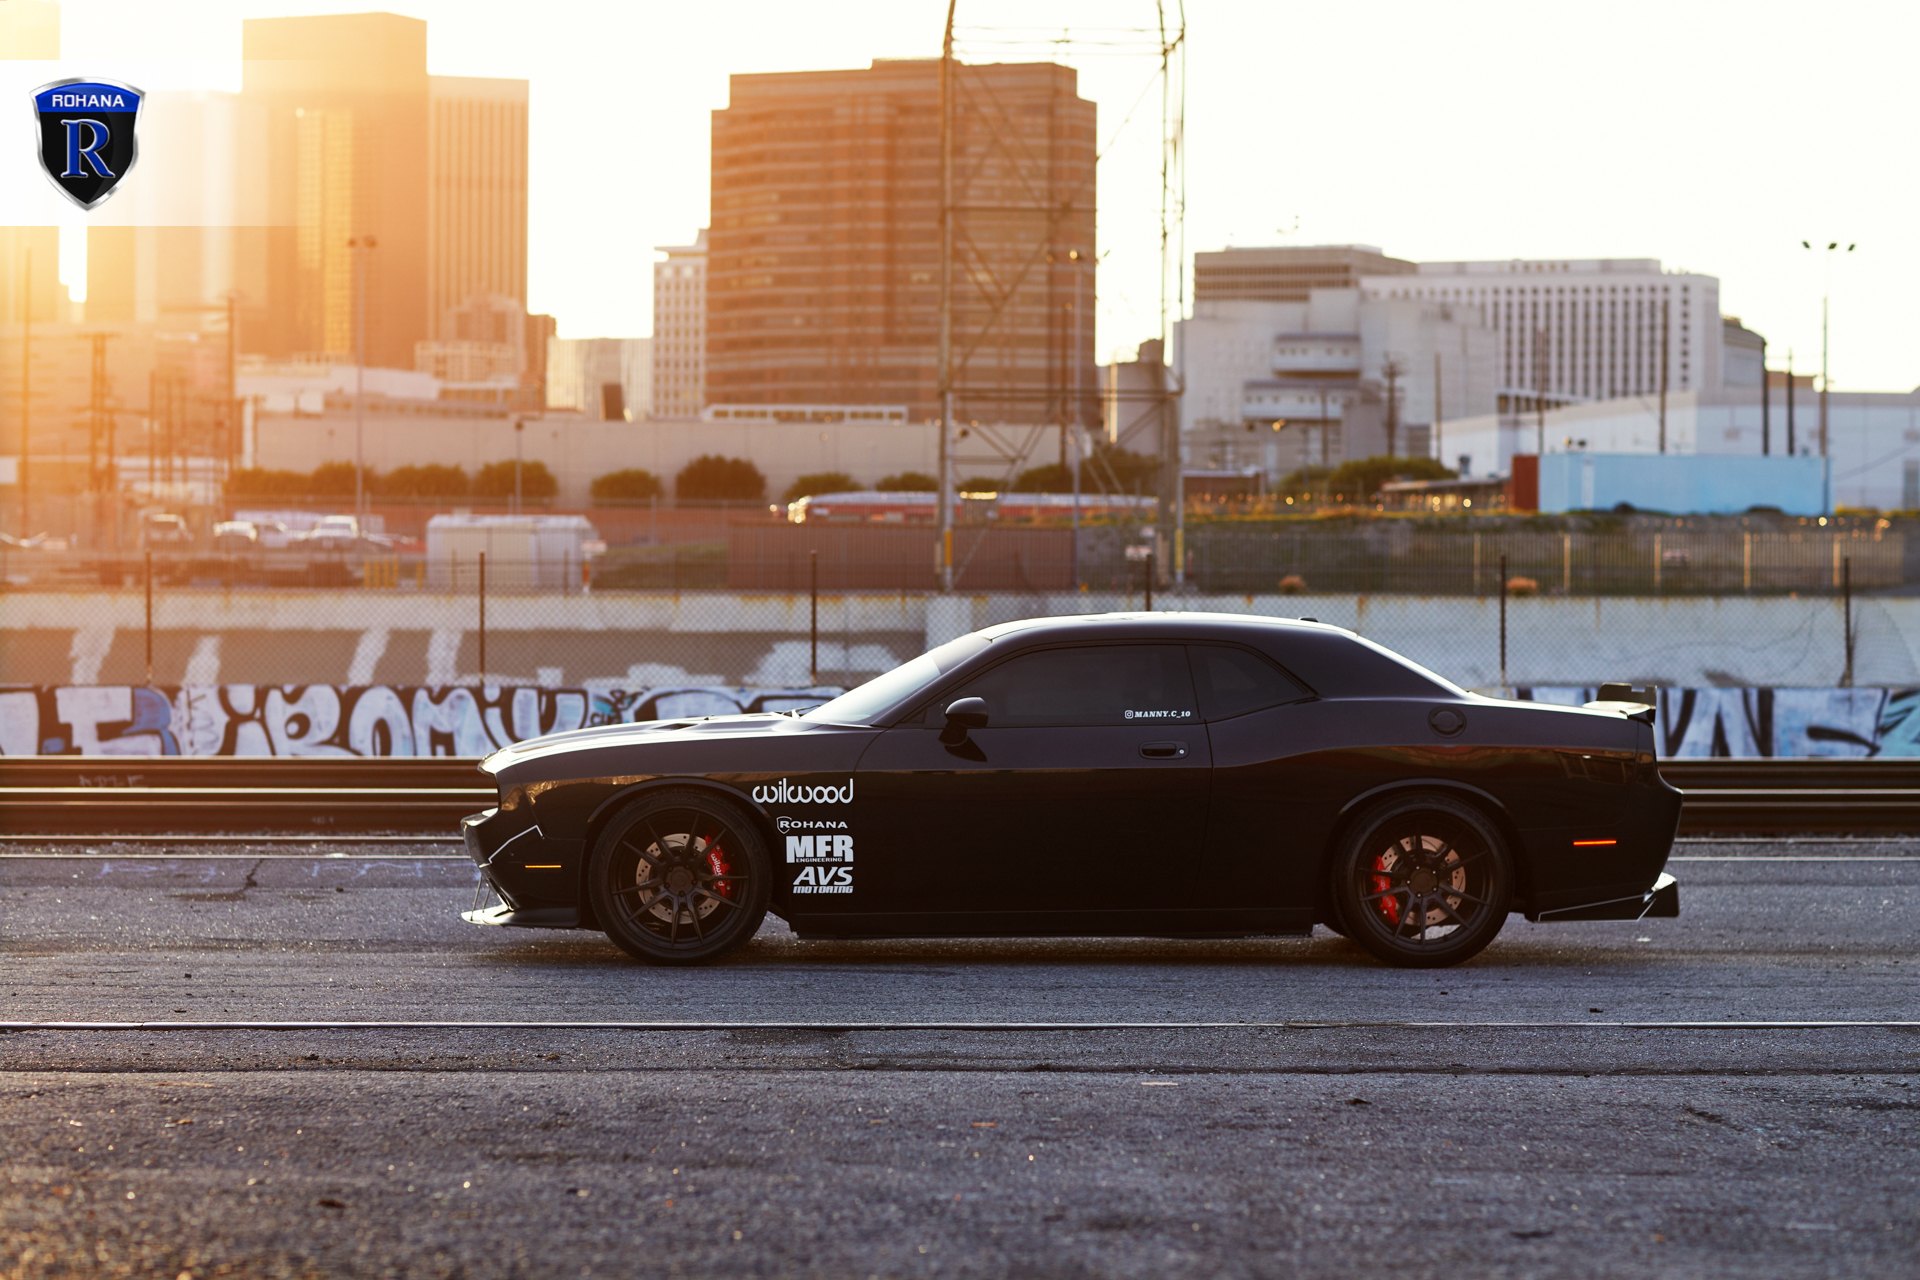 Aftermarket Side Skirts on Black Dodge Challenger - Photo by Rohana Wheels